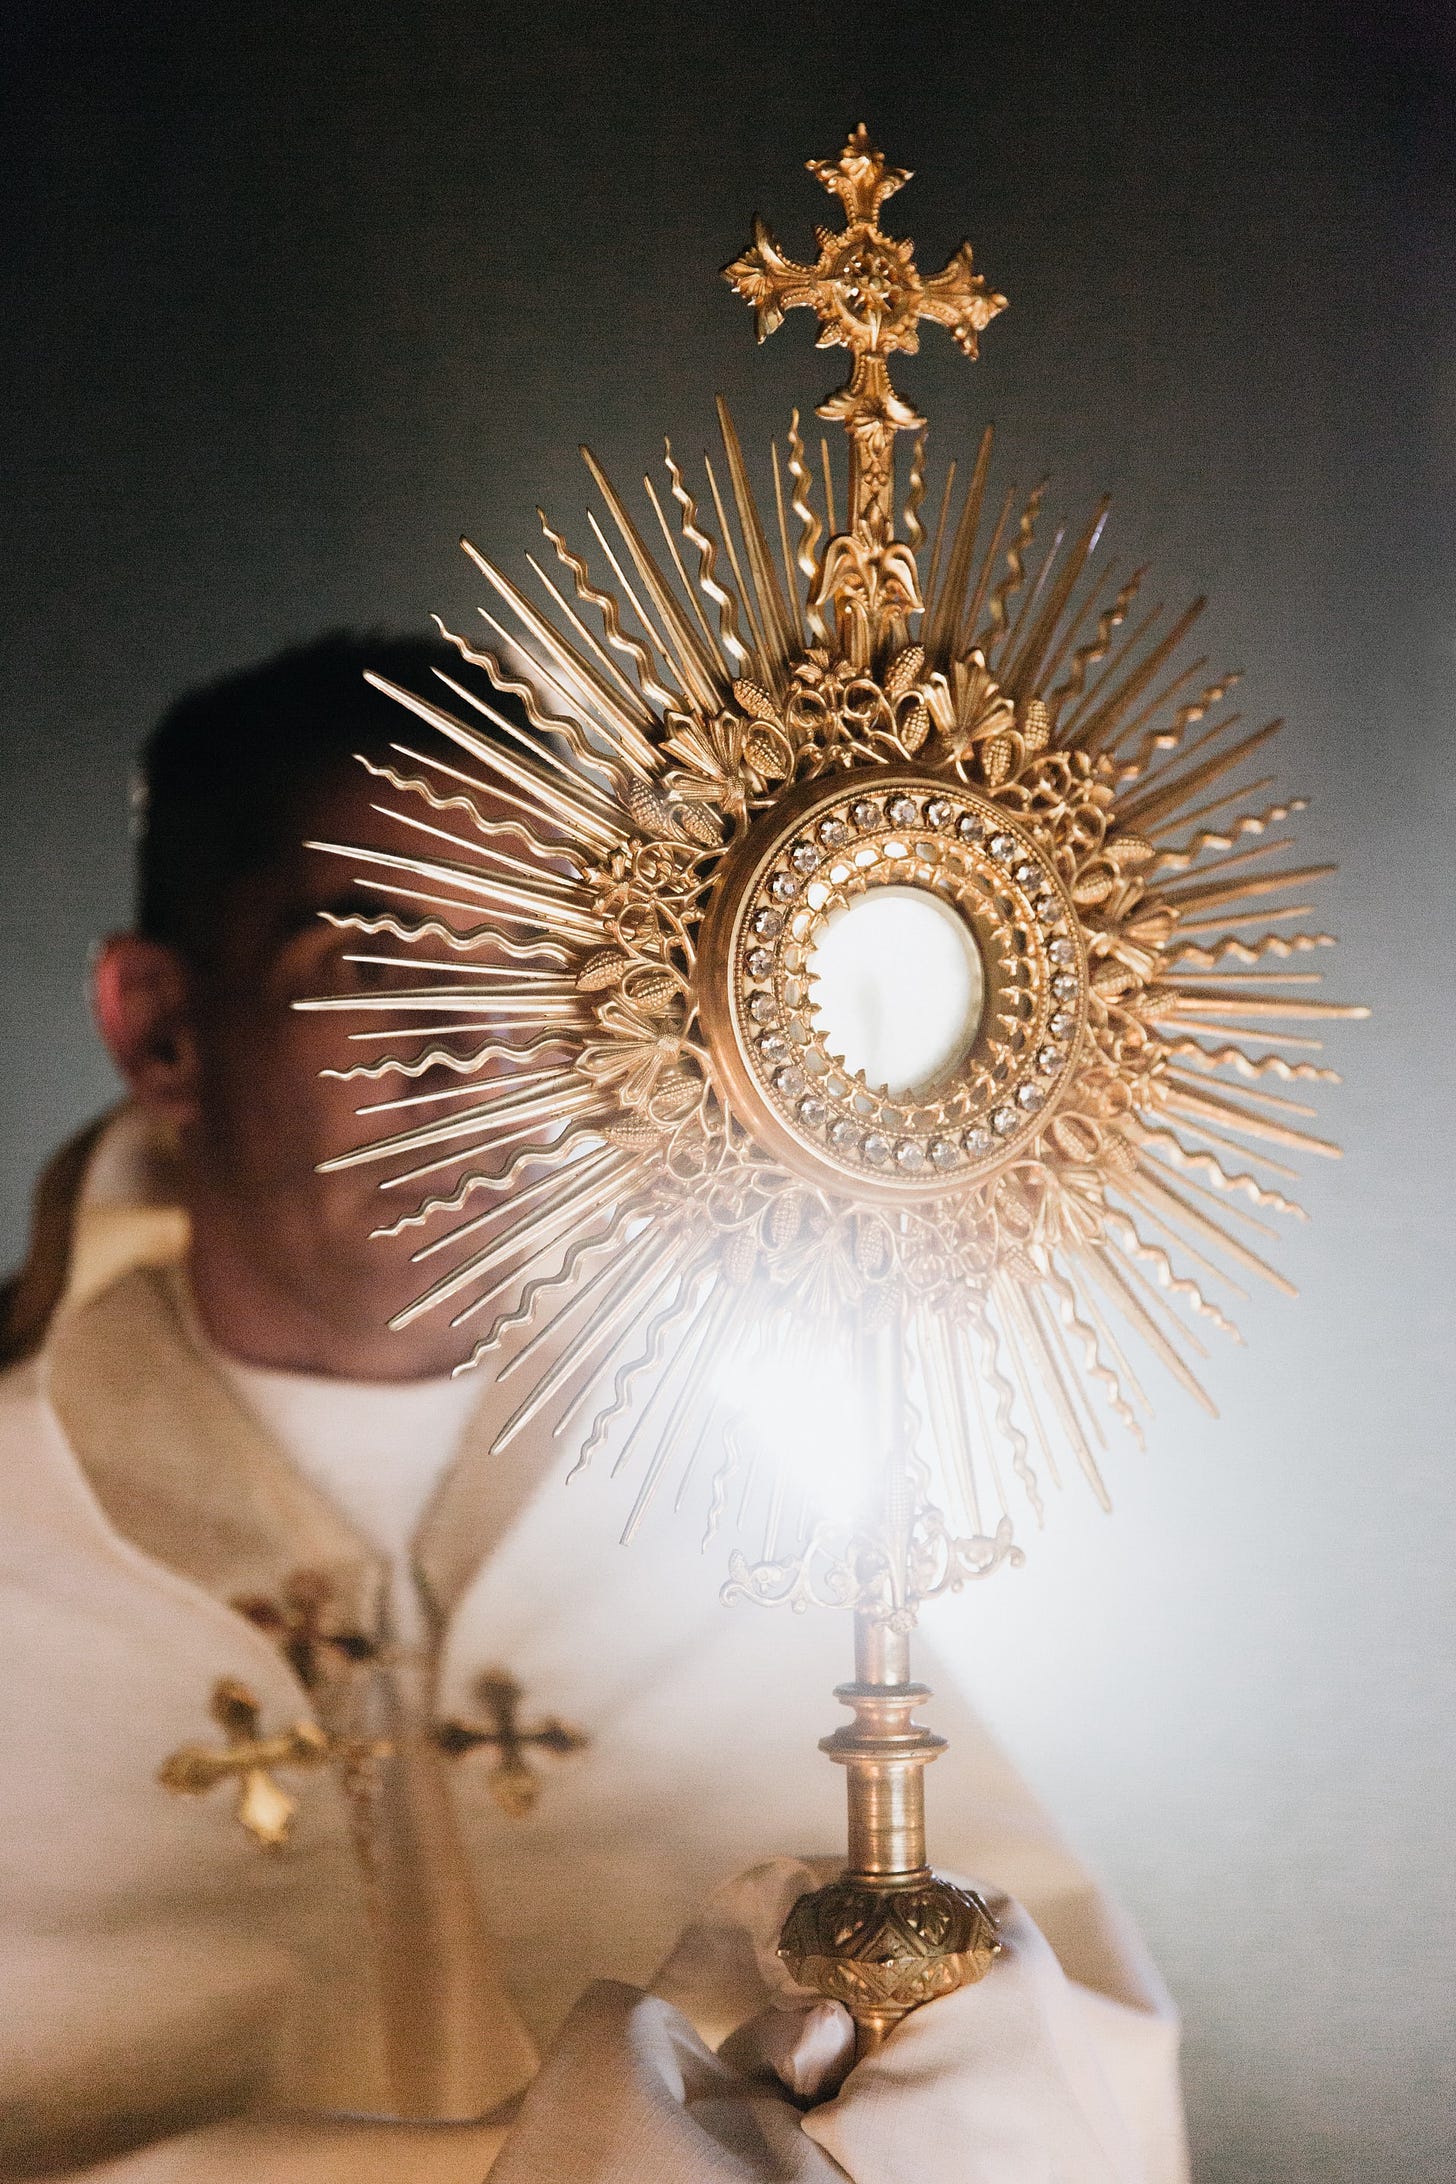 Image of a priest holding up a monstrance in which a consecrated host is displayed in a sunburst of rays